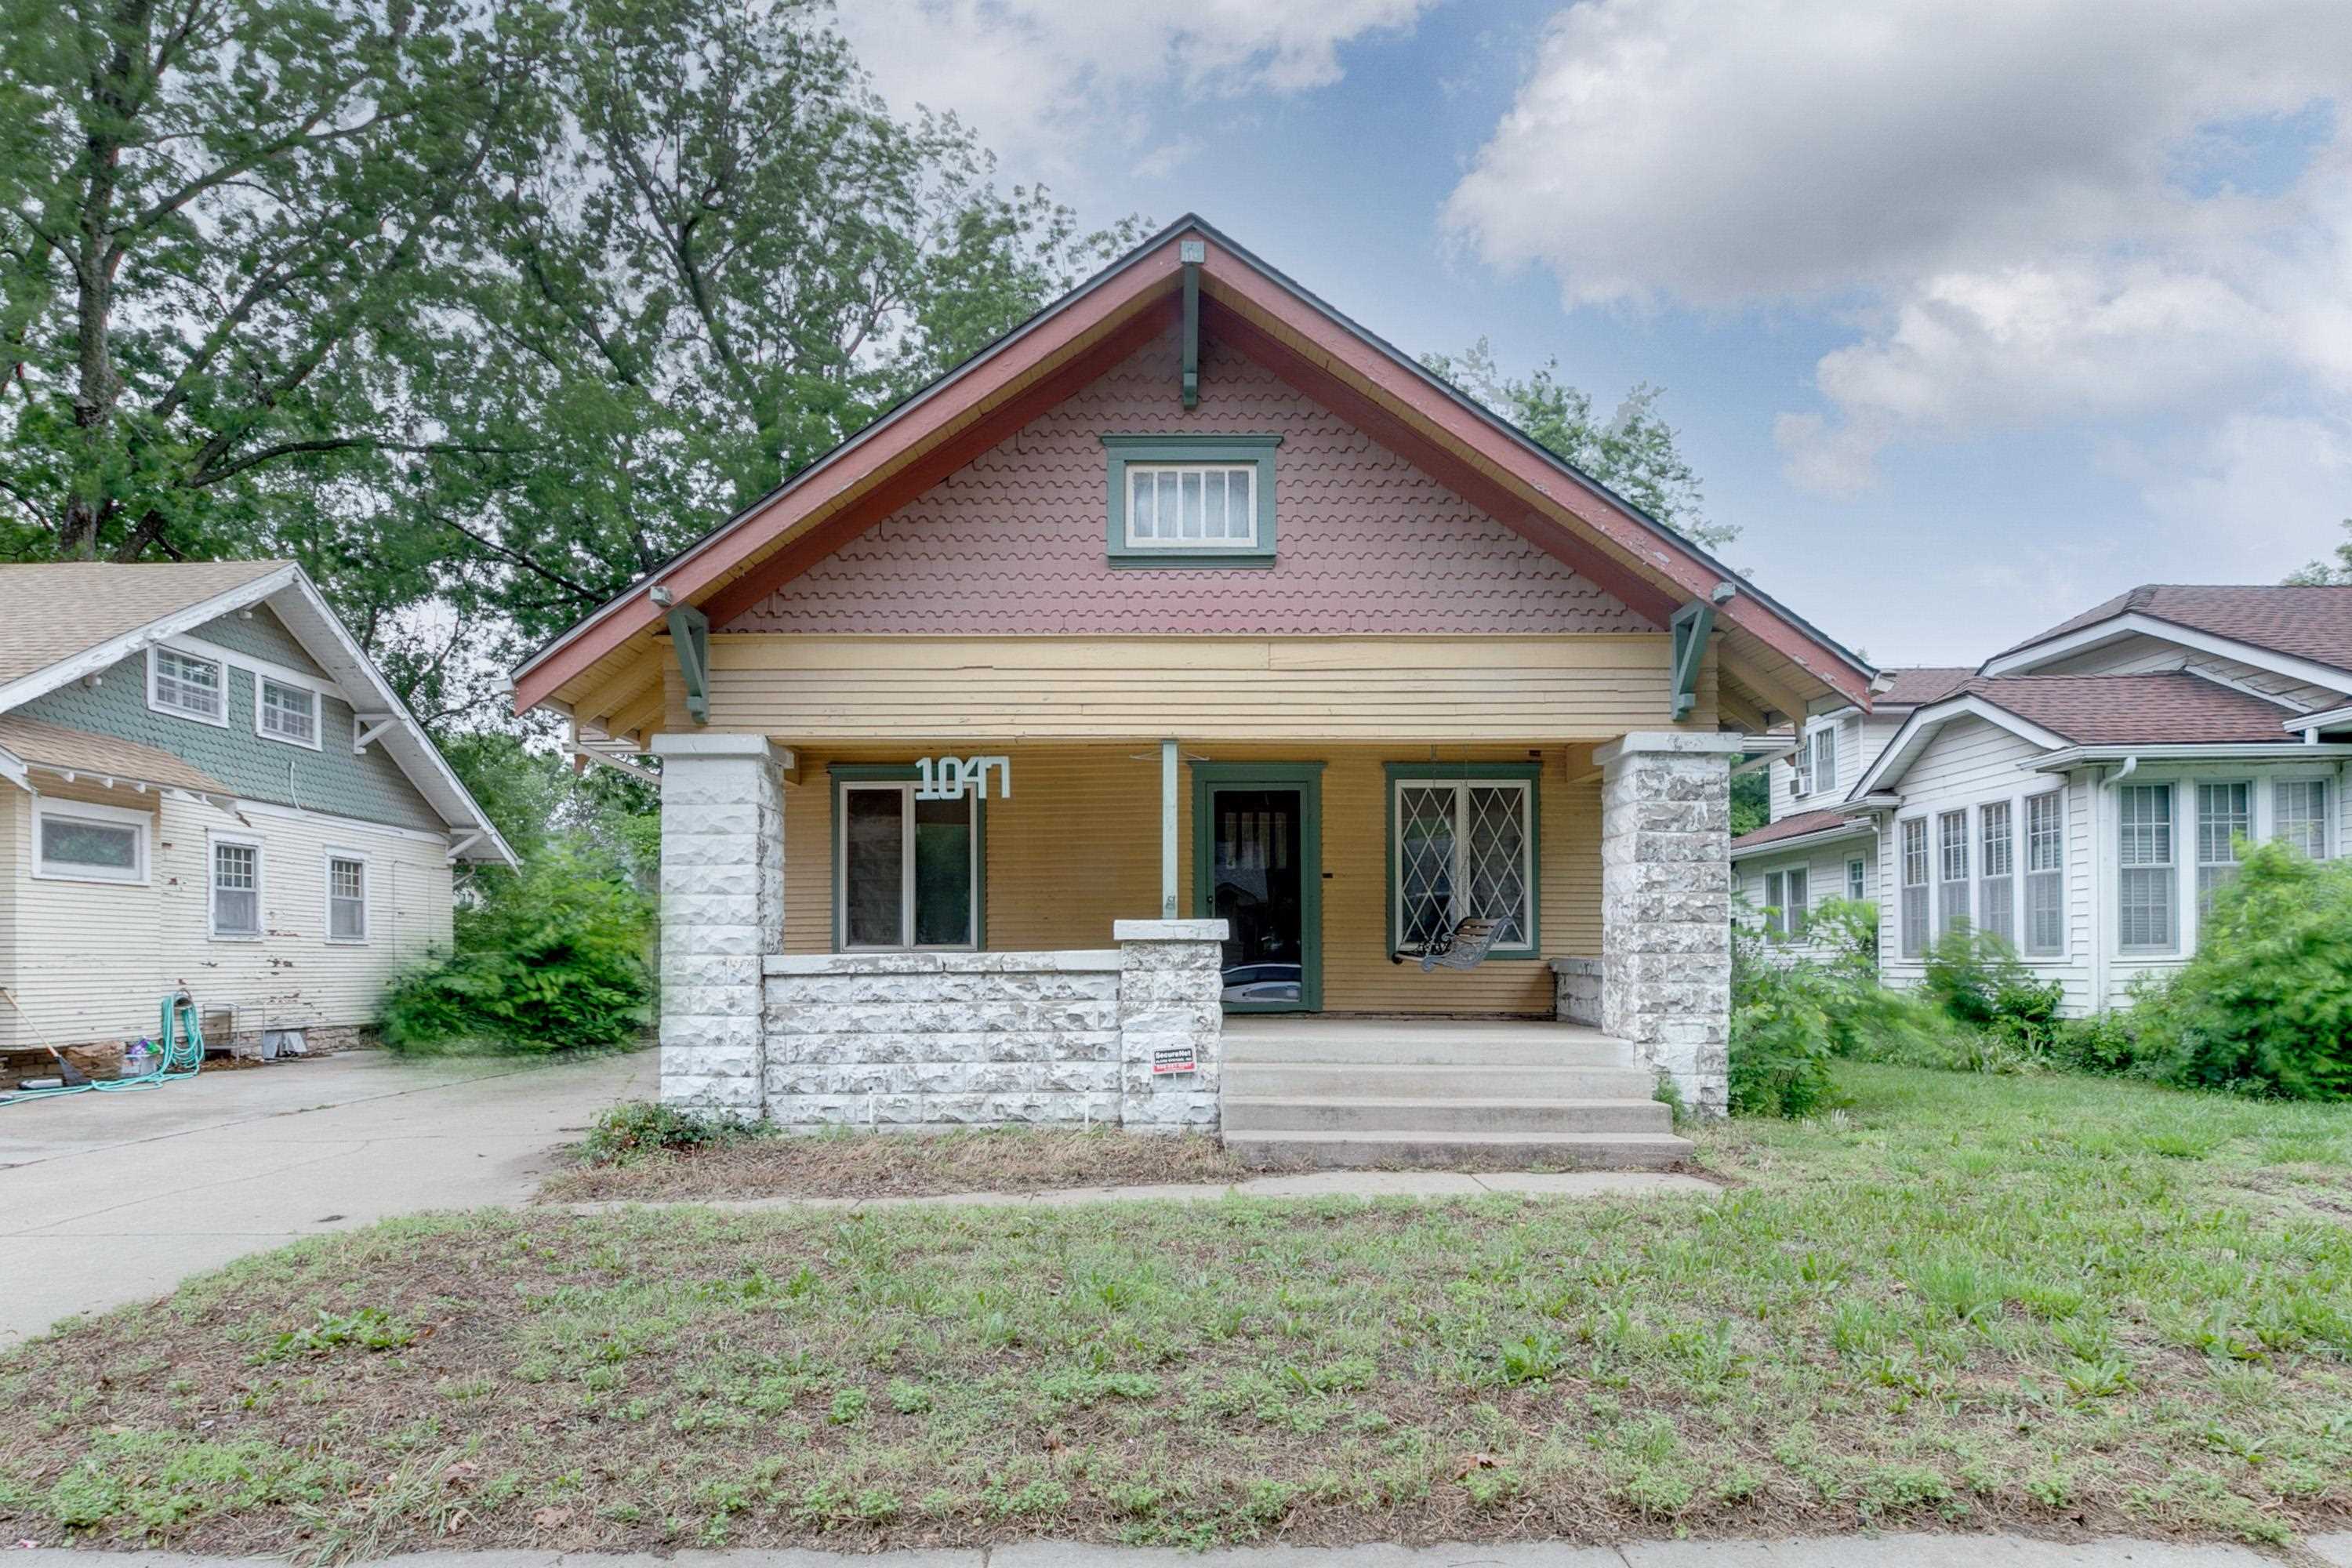 Charming 1912 Bungalow in desirable Riverside! Blocks from museums, shopping, and Keeper of the Plai